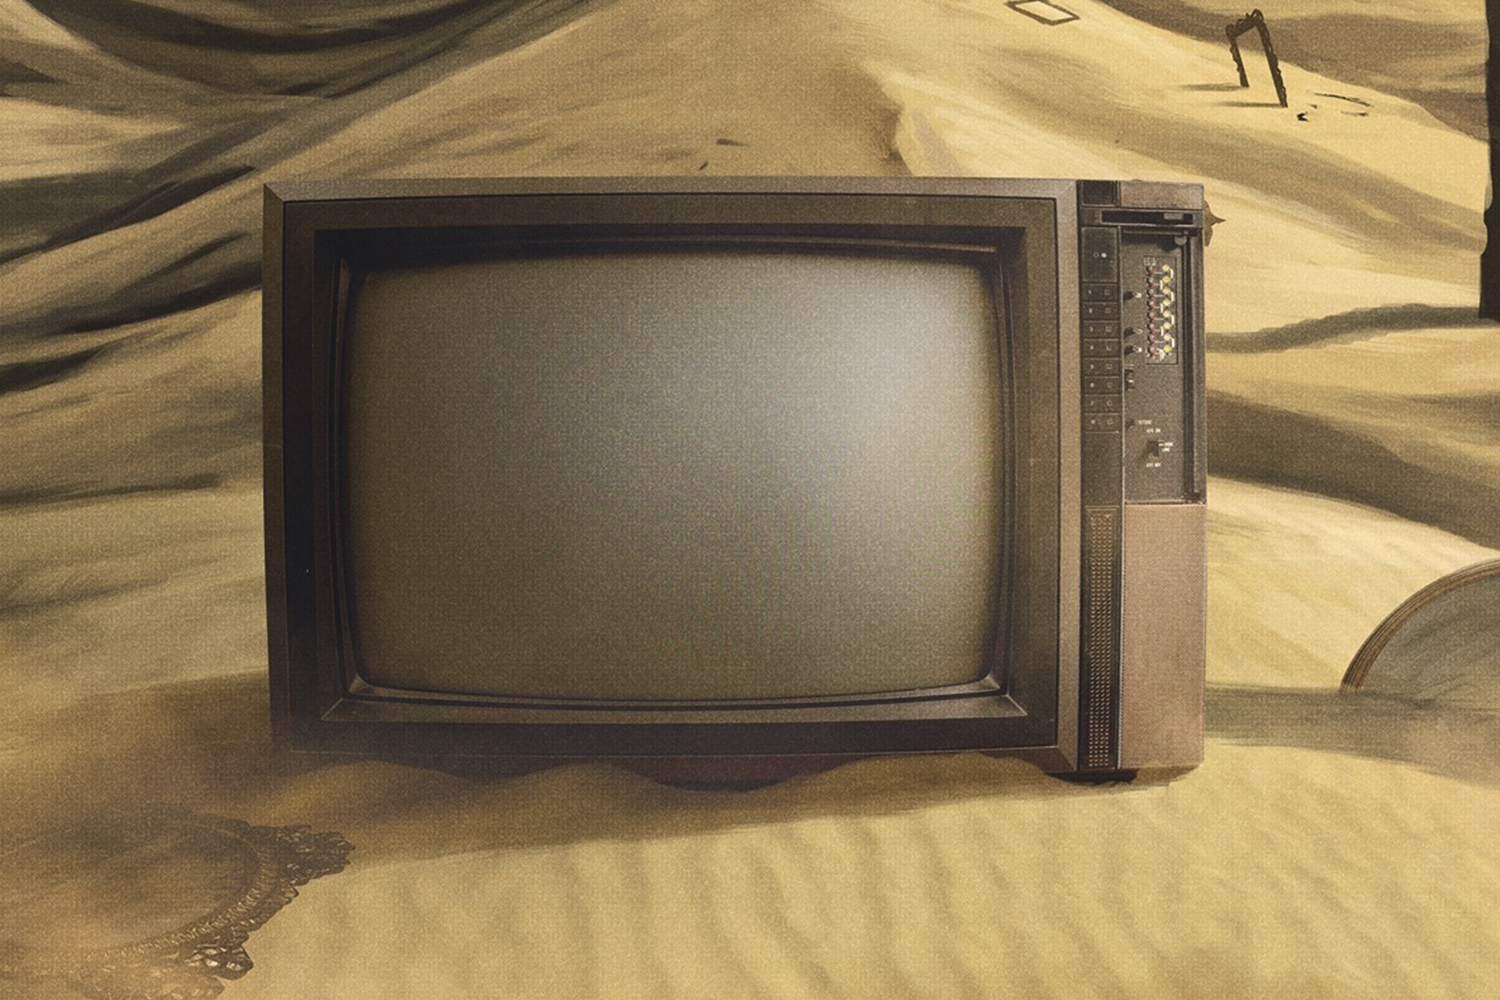 television in the desert